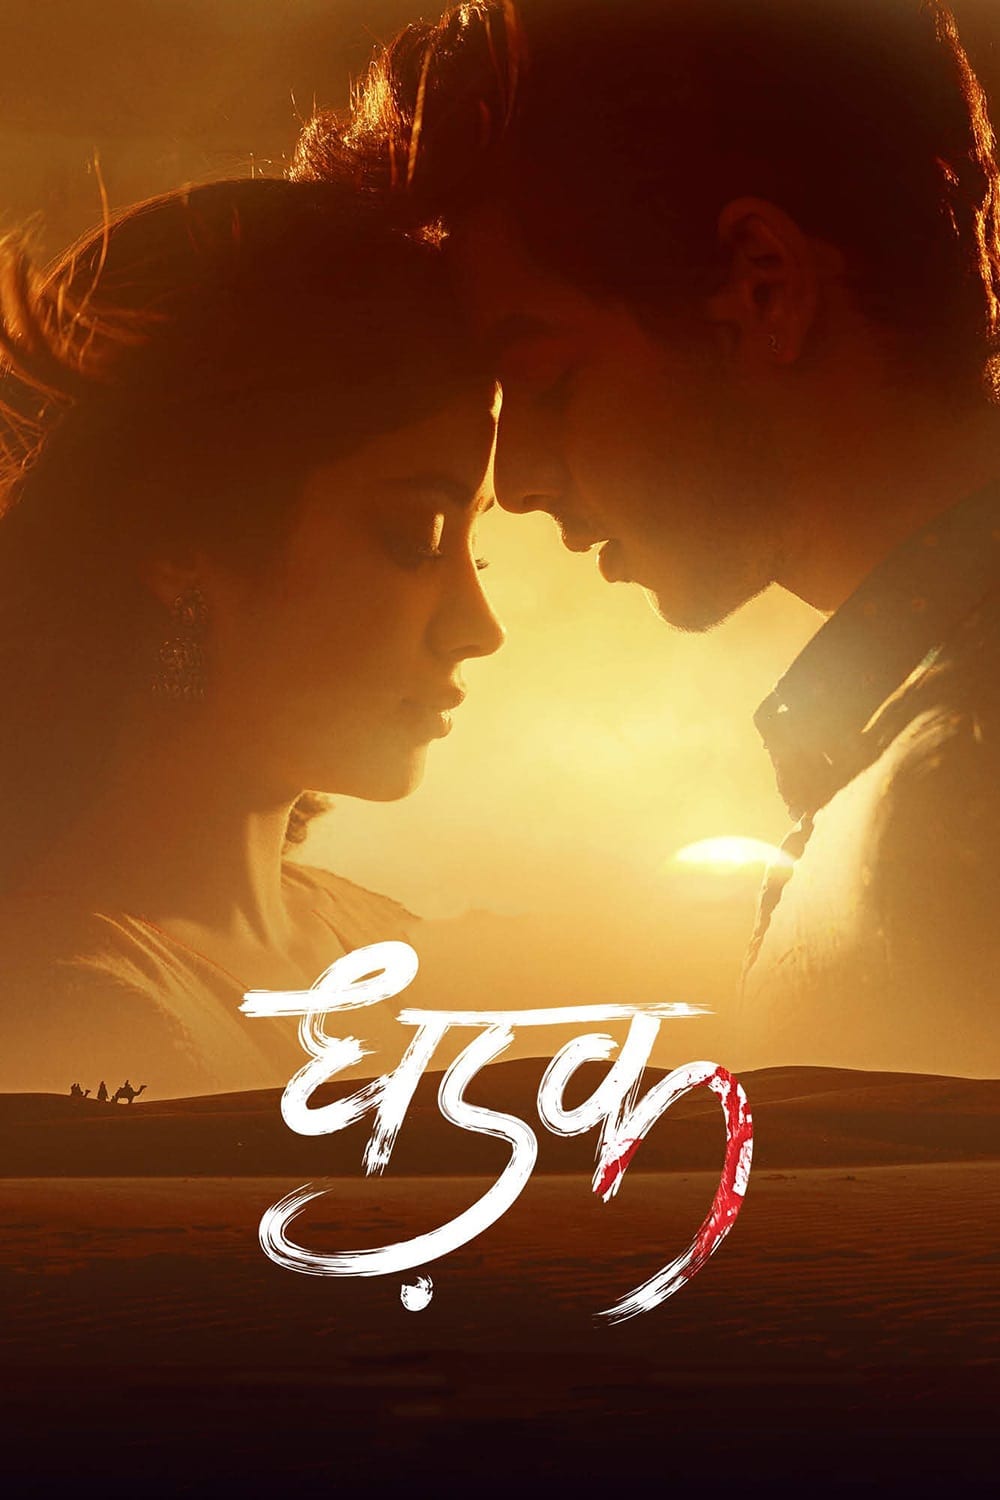 Poster for the movie "Dhadak"